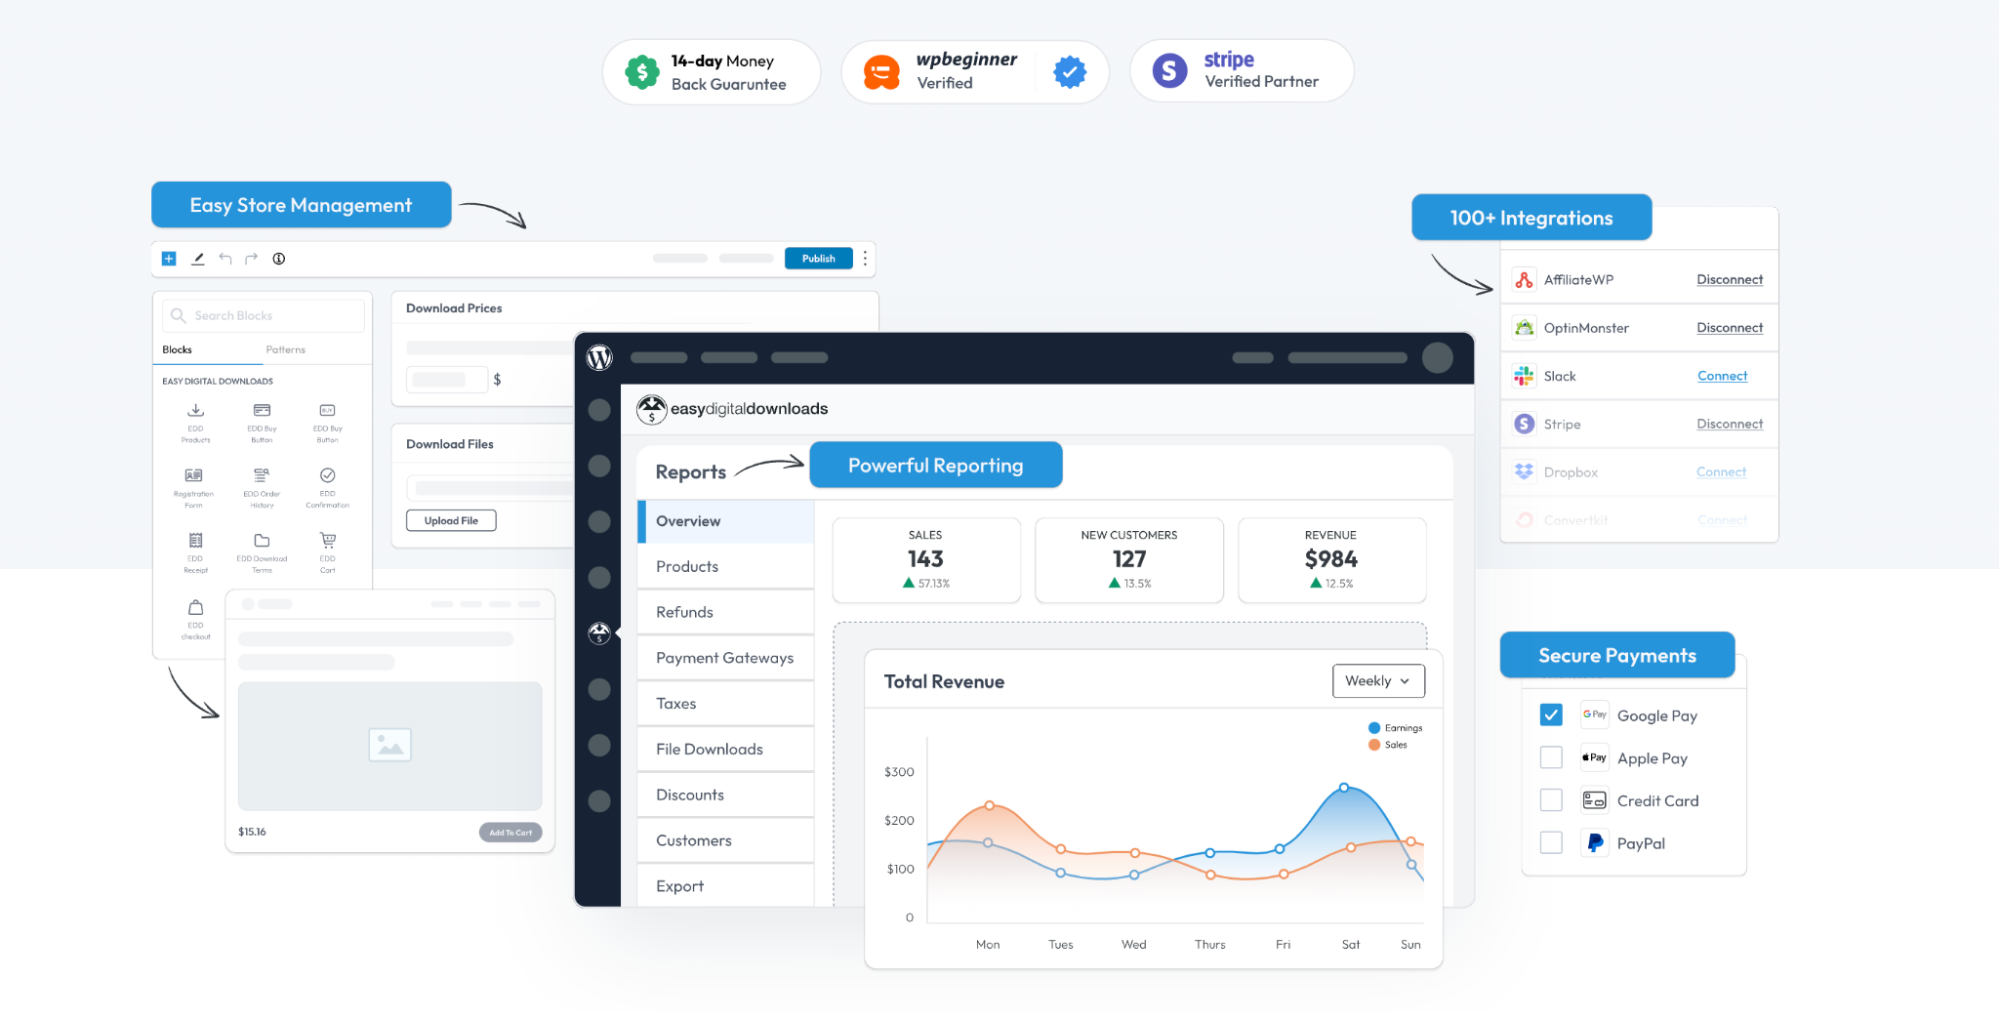 Dashboard with features annotated with labels like Payments, Overview, and Integrations.